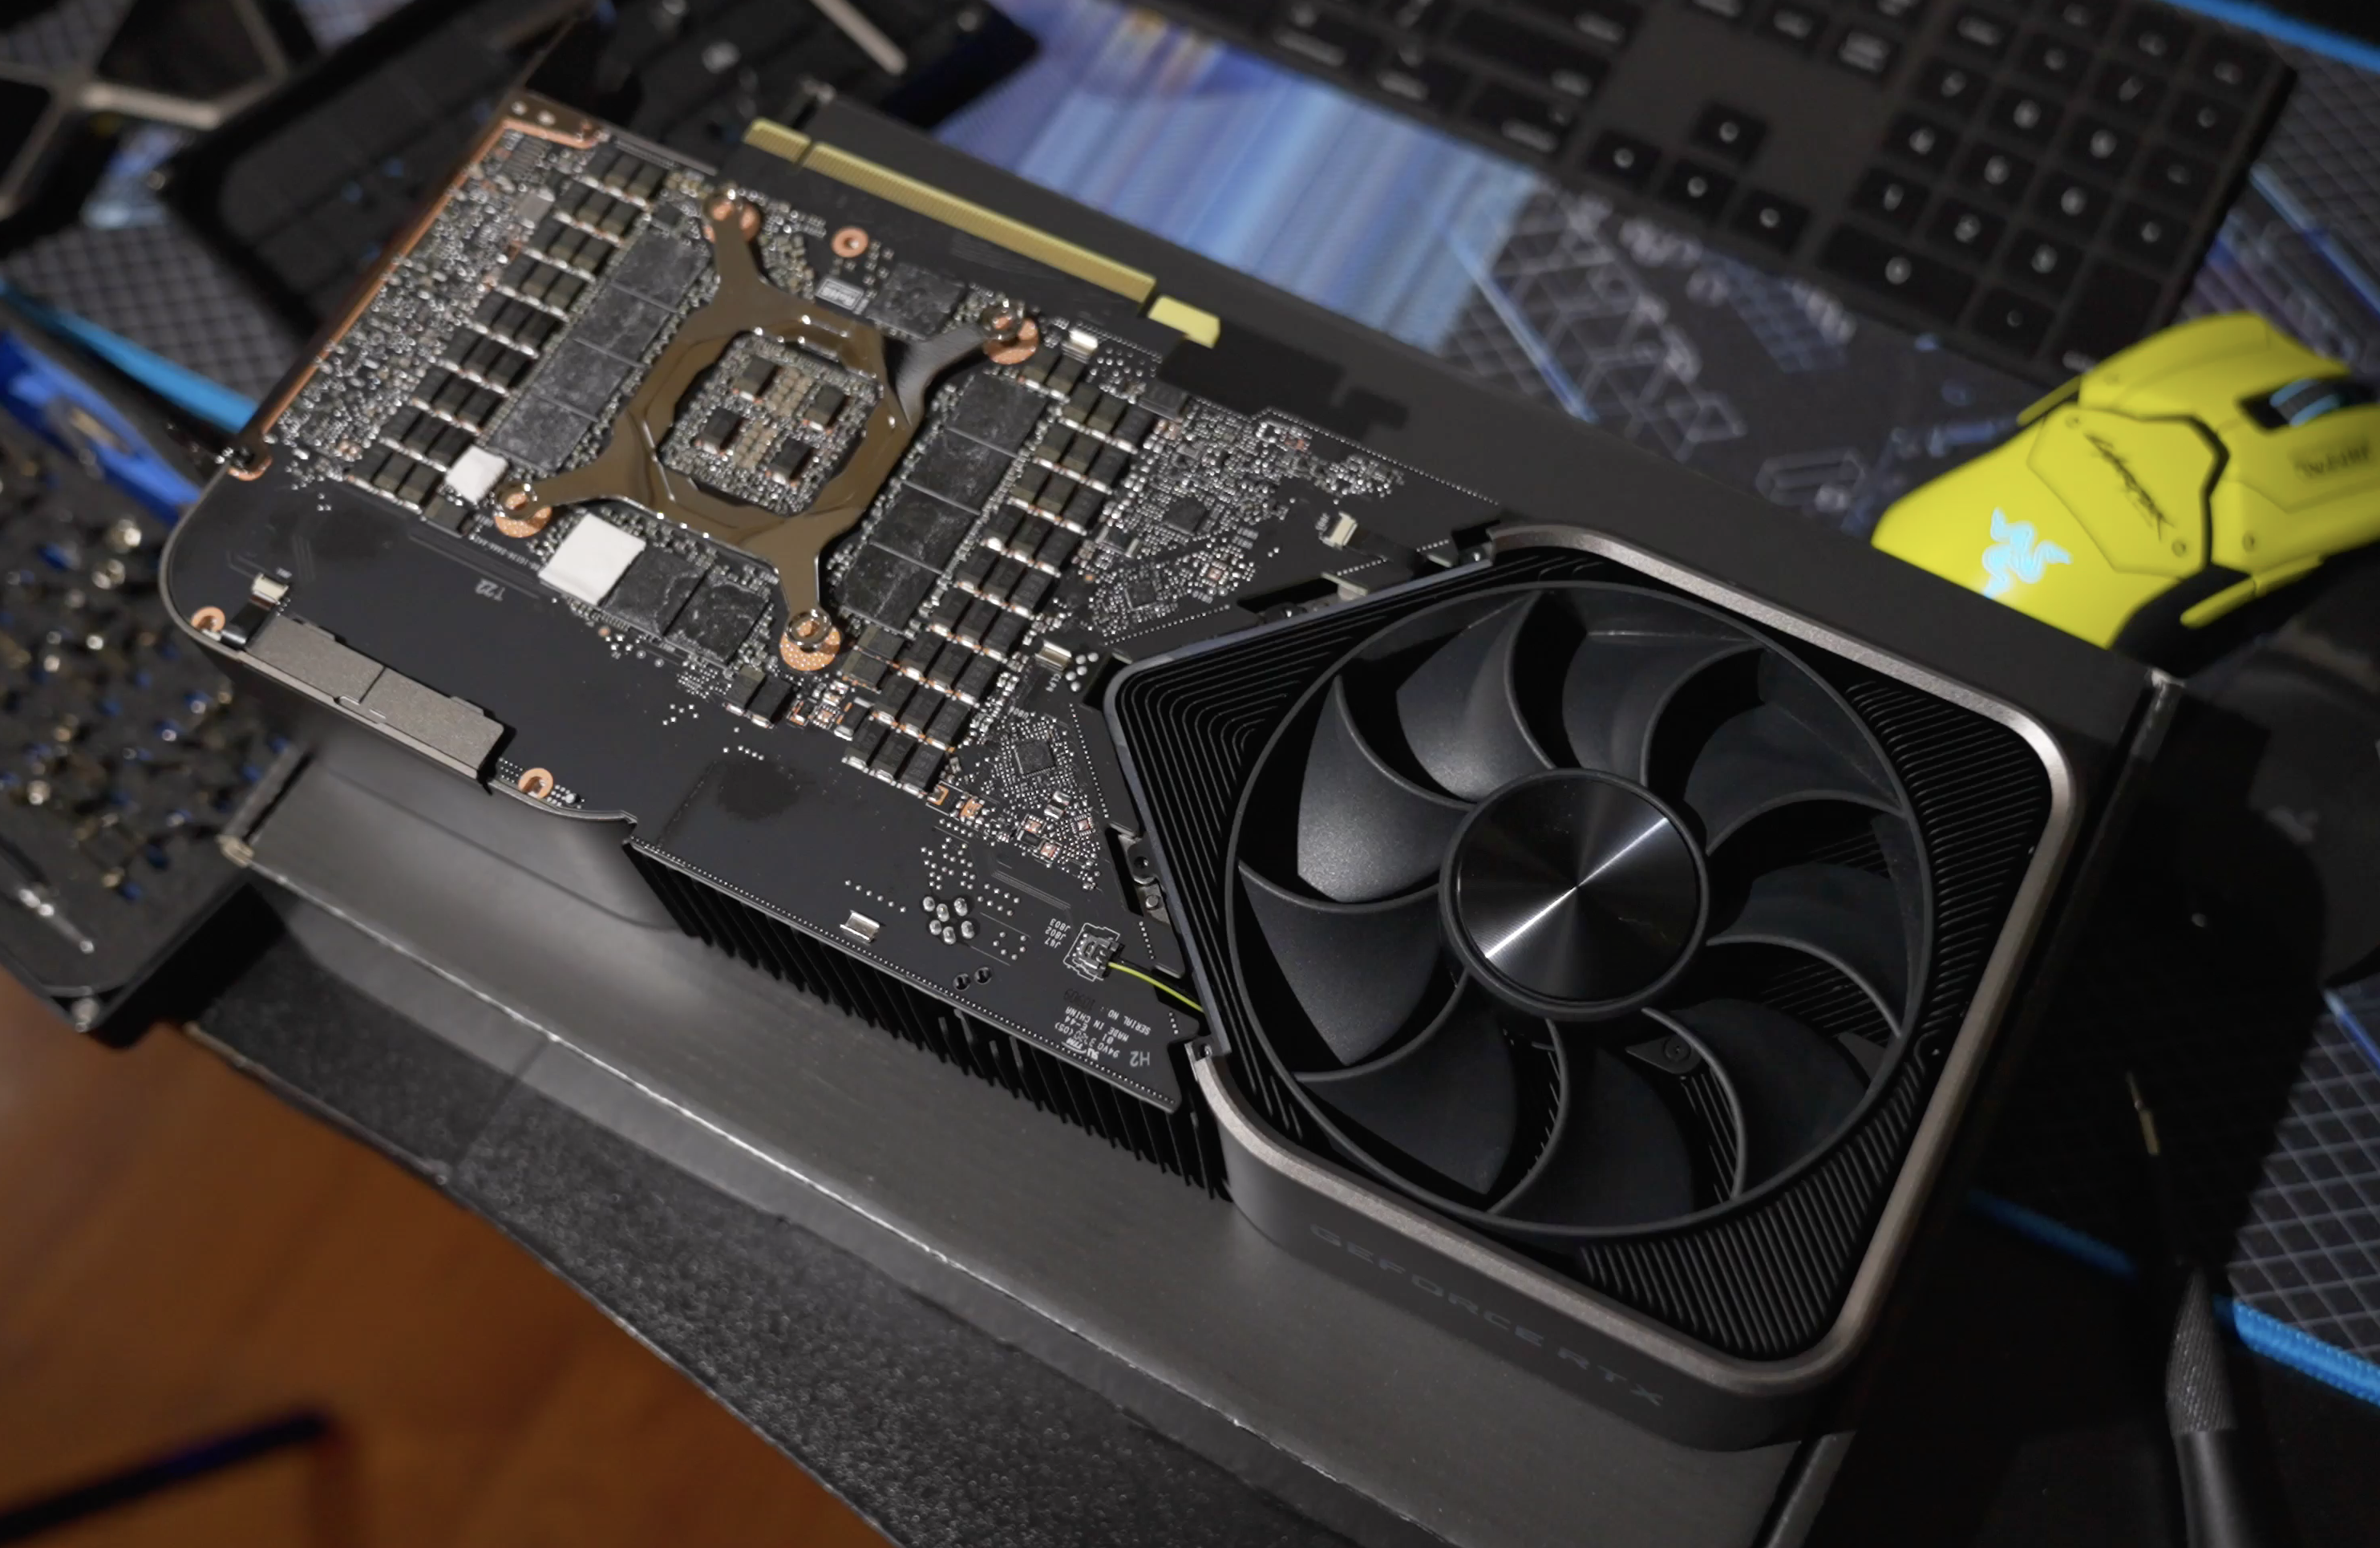 Best GPUs for Mining Crypto in Overview of The Top Graphics Cards